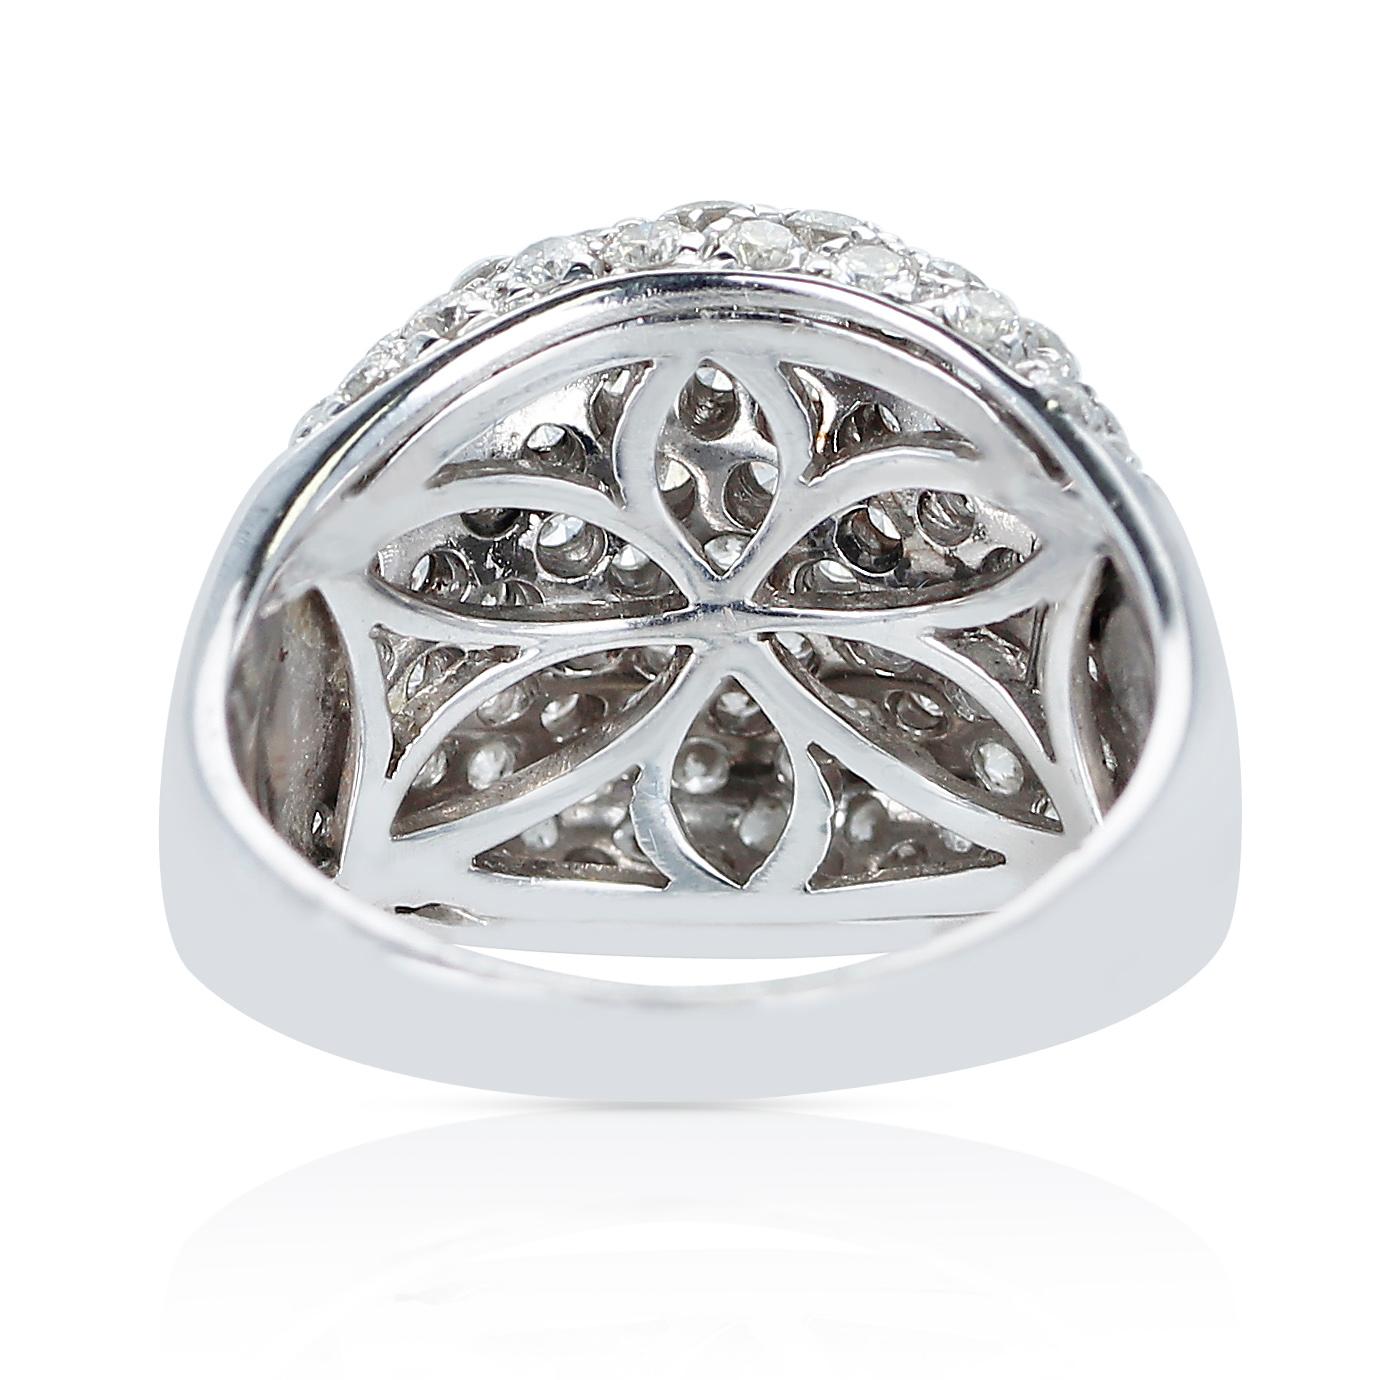 2.50 Cts. Diamond Bombe Cocktail Ring, 18k White Gold In Excellent Condition For Sale In New York, NY